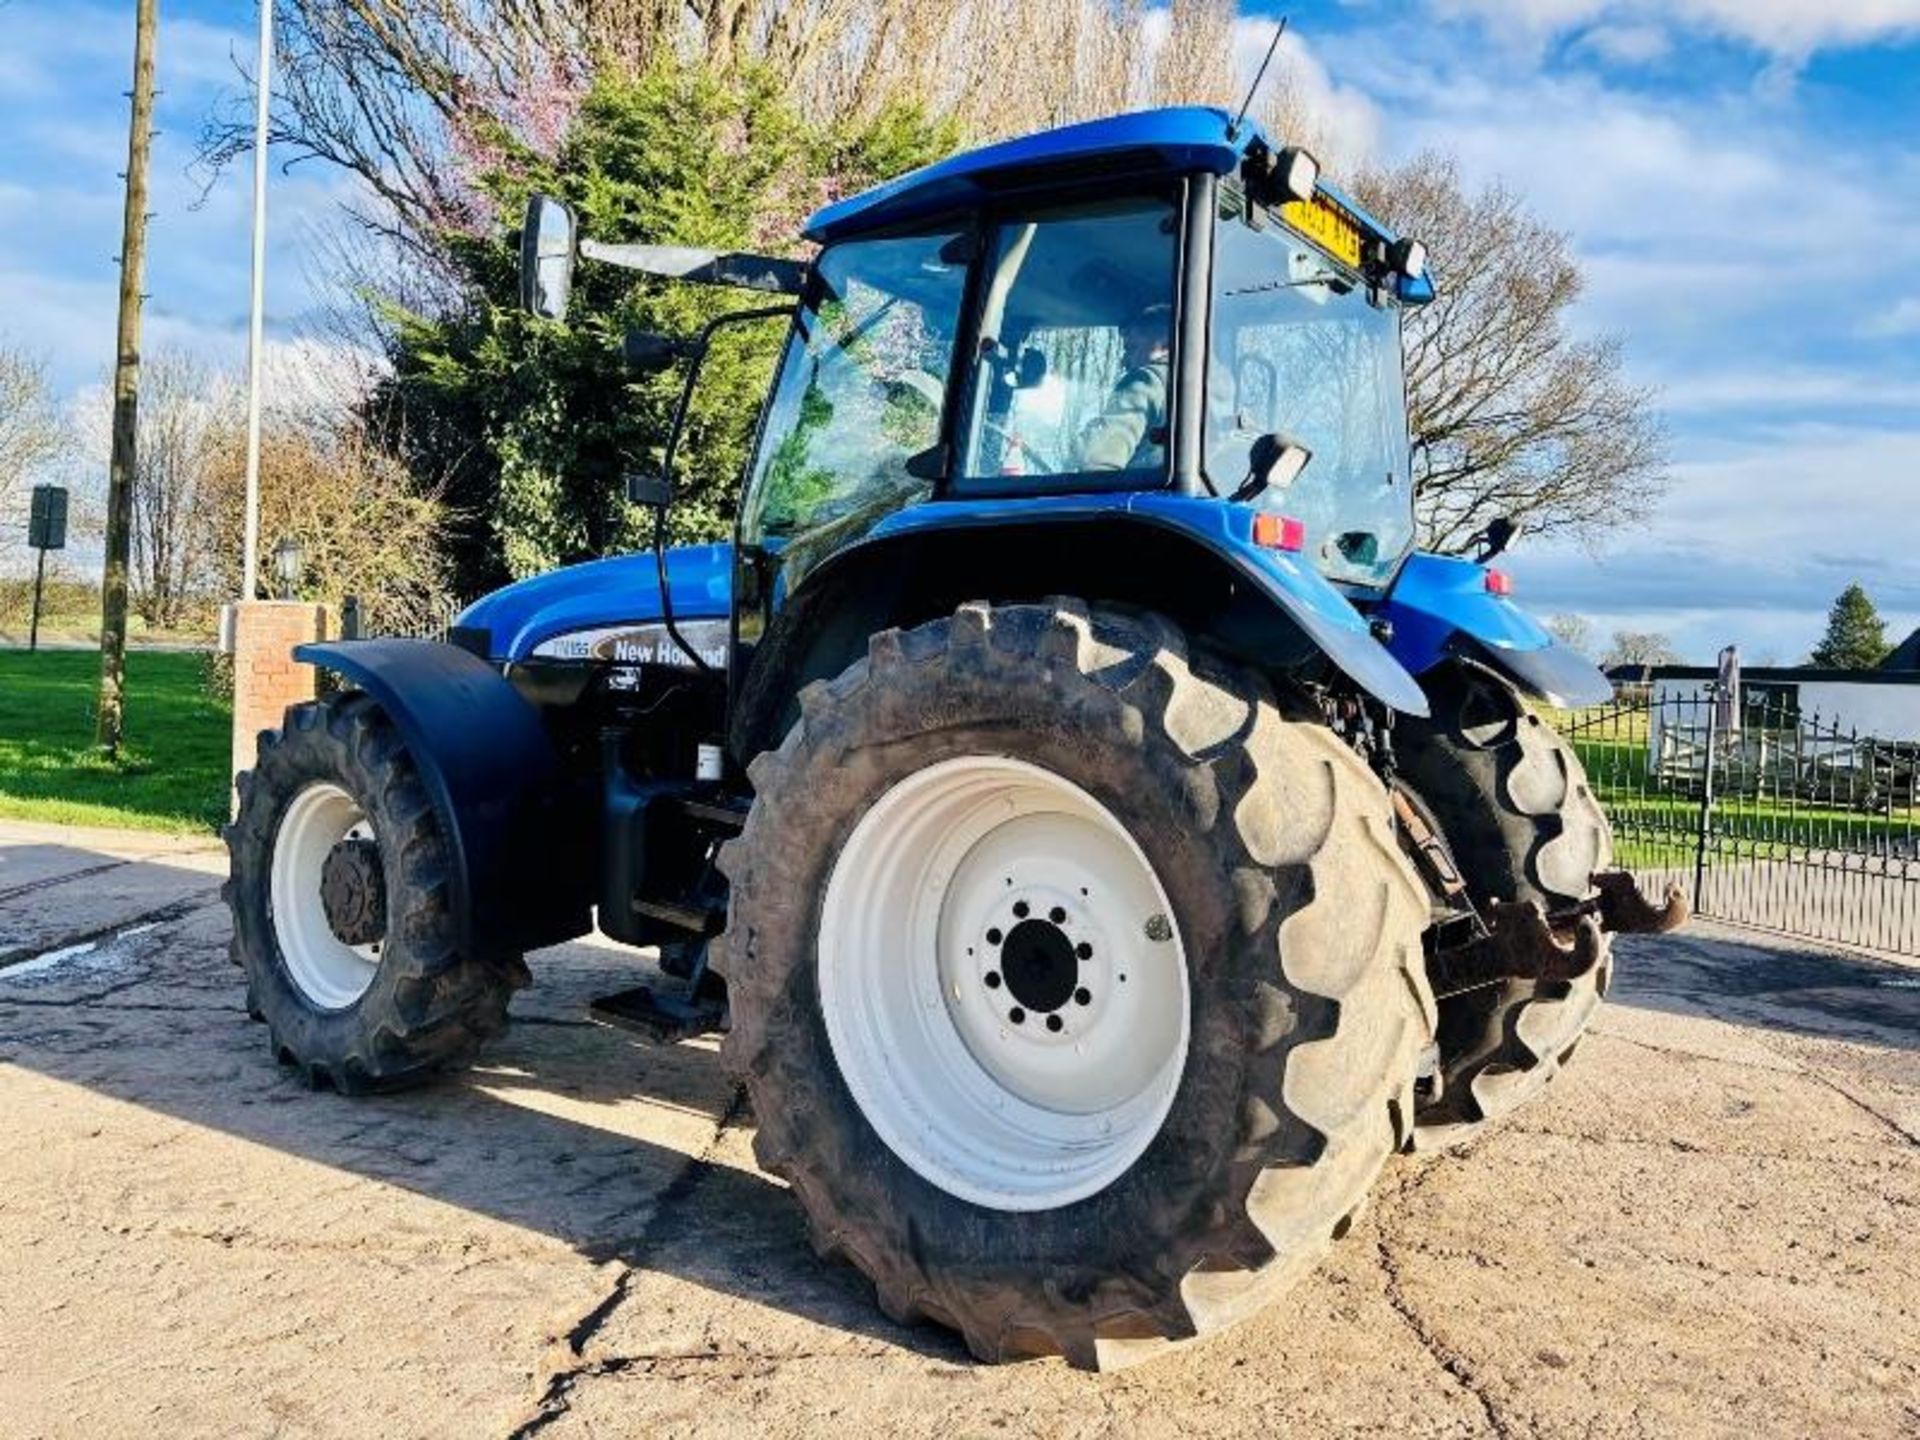 NEW HOLLAND TM155 4WD TRACTOR *5619 HOURS* C/W RANGE COMMAND GEAR BOX - Image 6 of 19